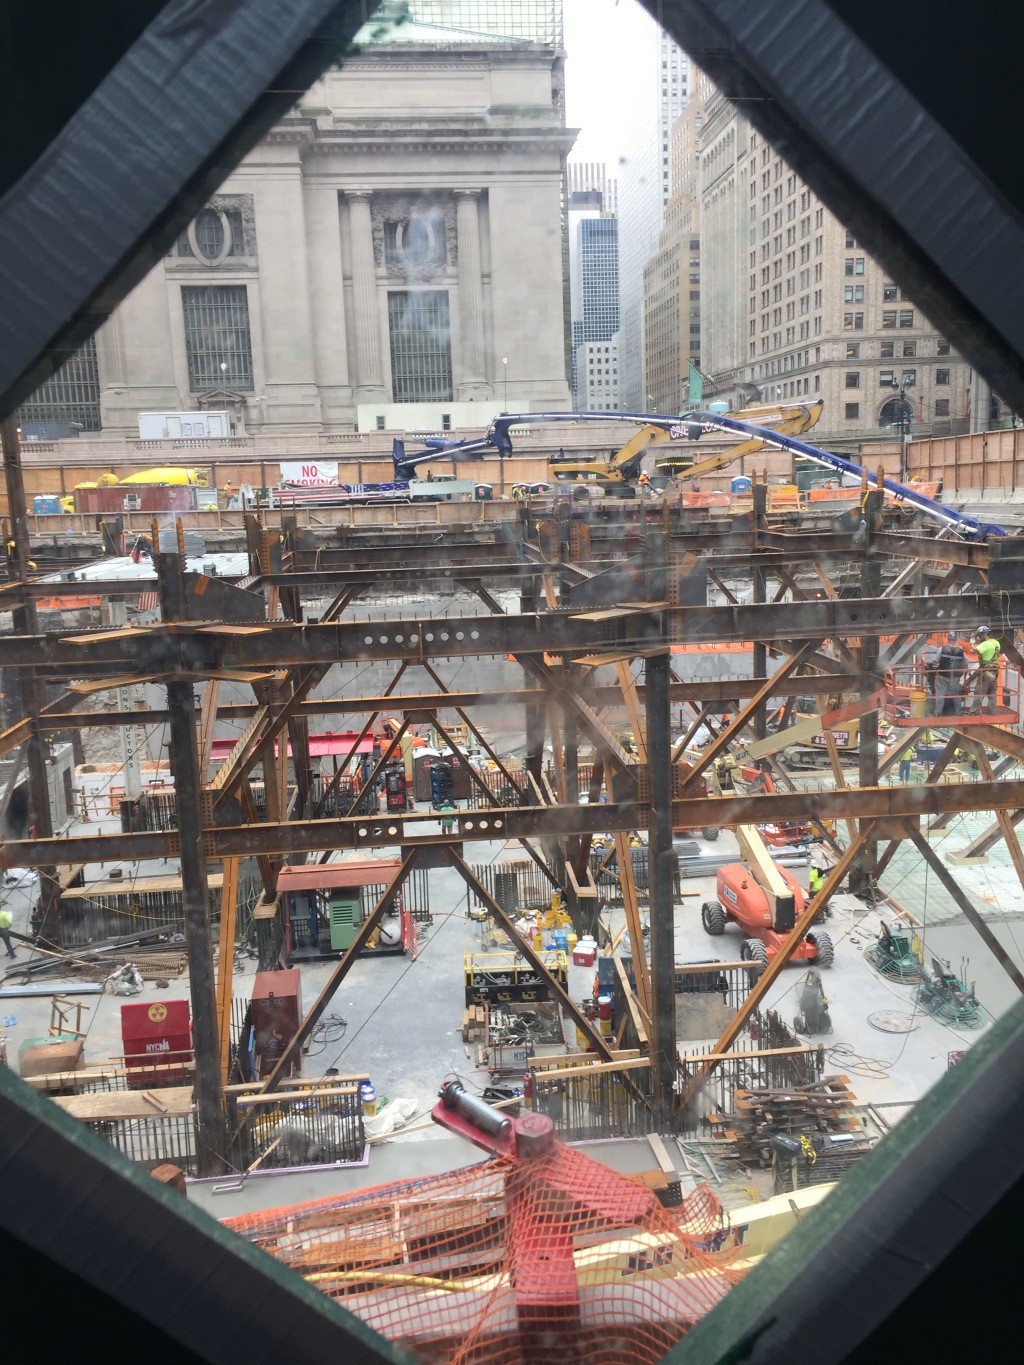 Looking at construction through the “Kyle windows”